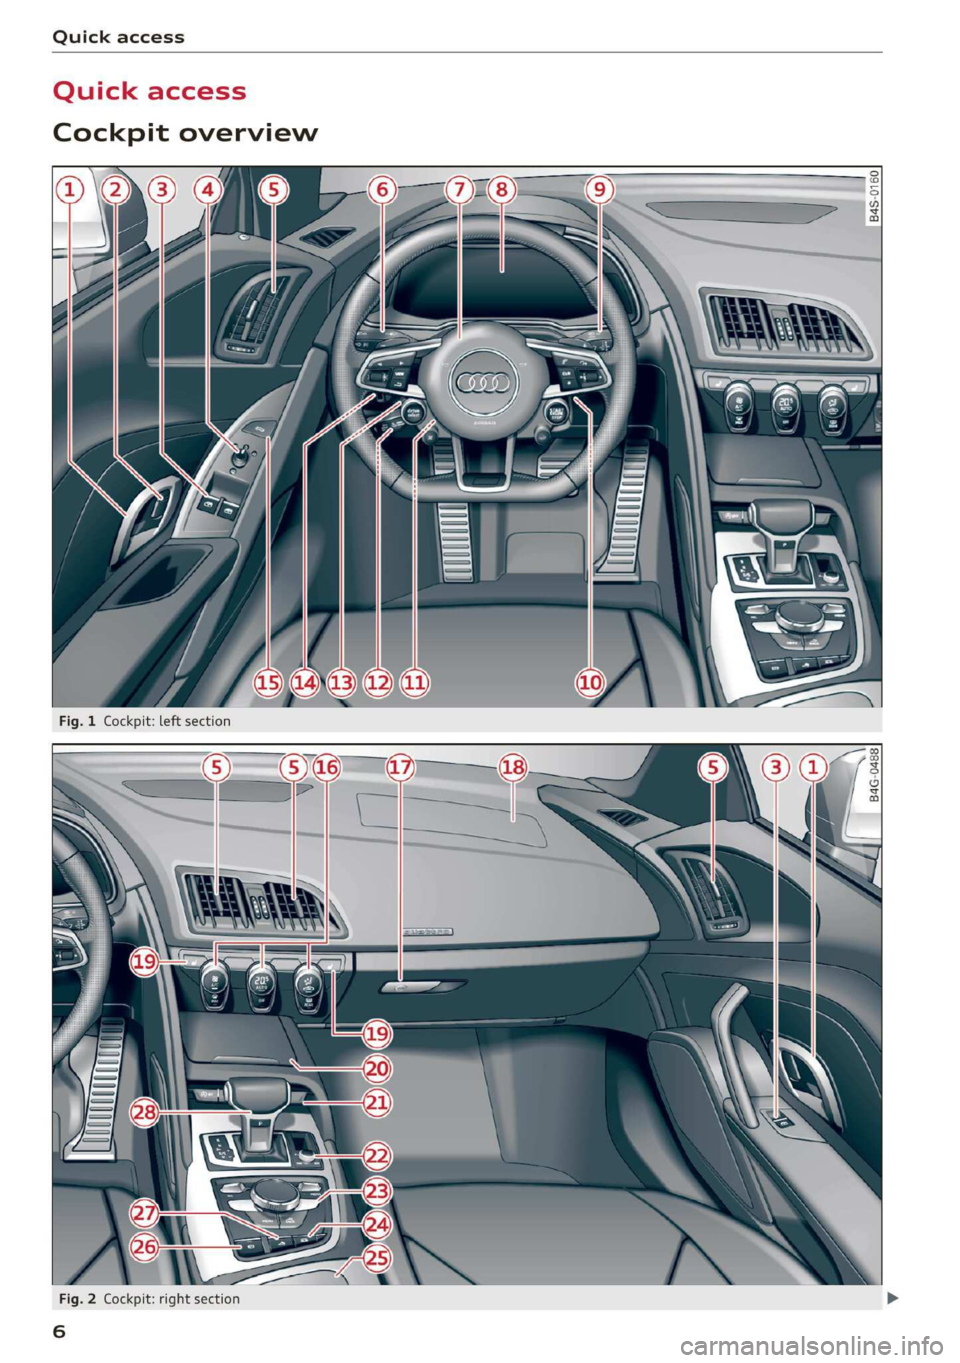 AUDI R8 COUPE 2020  Owners Manual Quick access 
Cockpit overview 
    
B4s-0160 
              
  
  
  
  
  
Fig. 2 Cockpit: right section 
6  